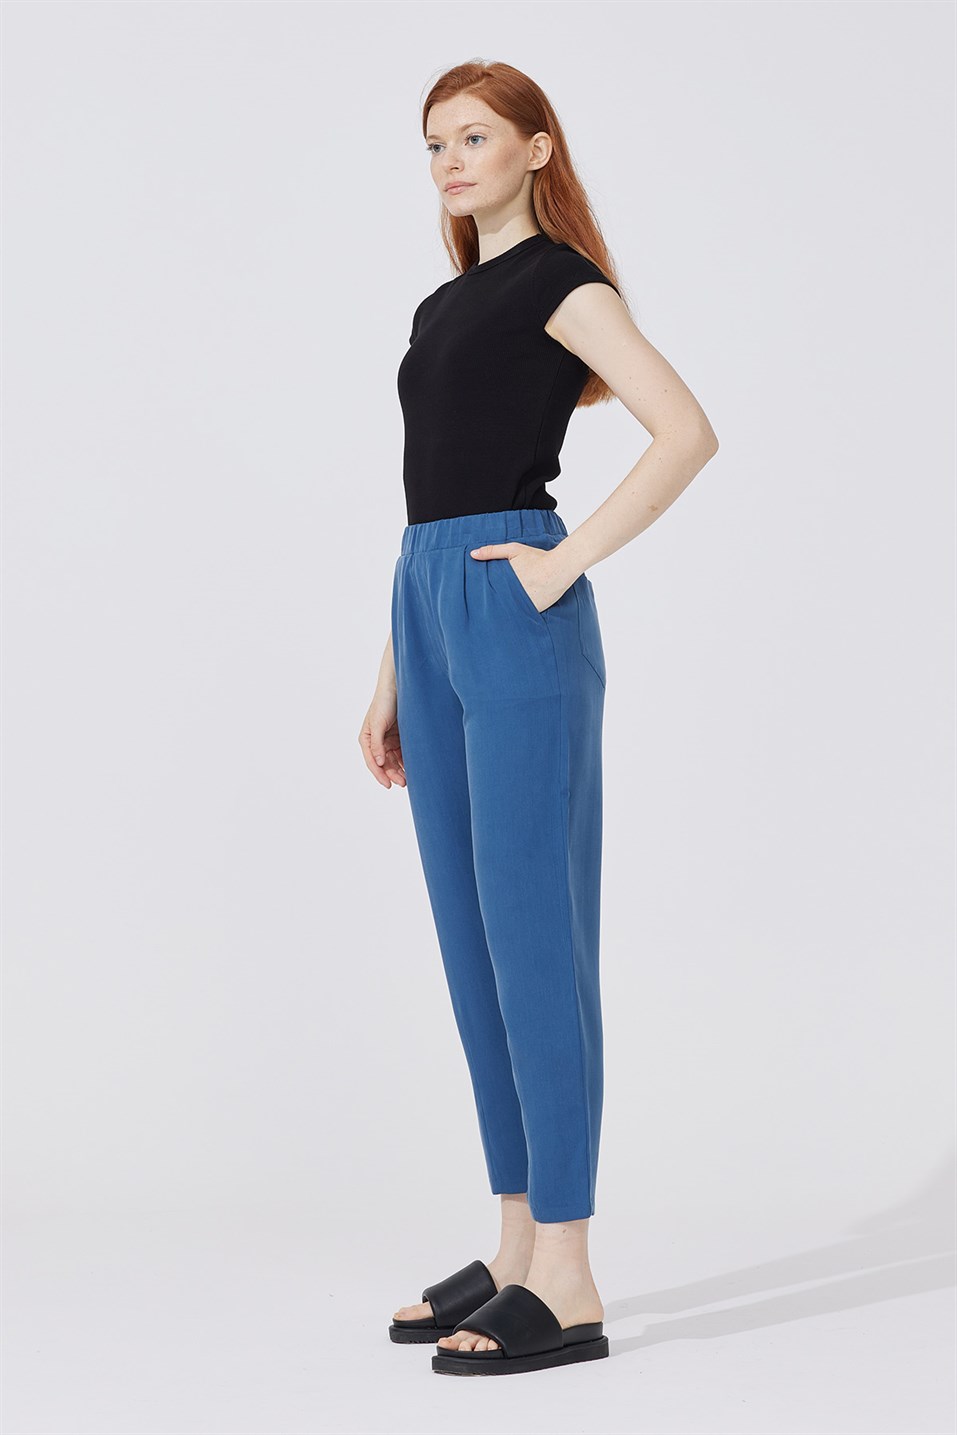 Saxe Pleated Tencel Trousers